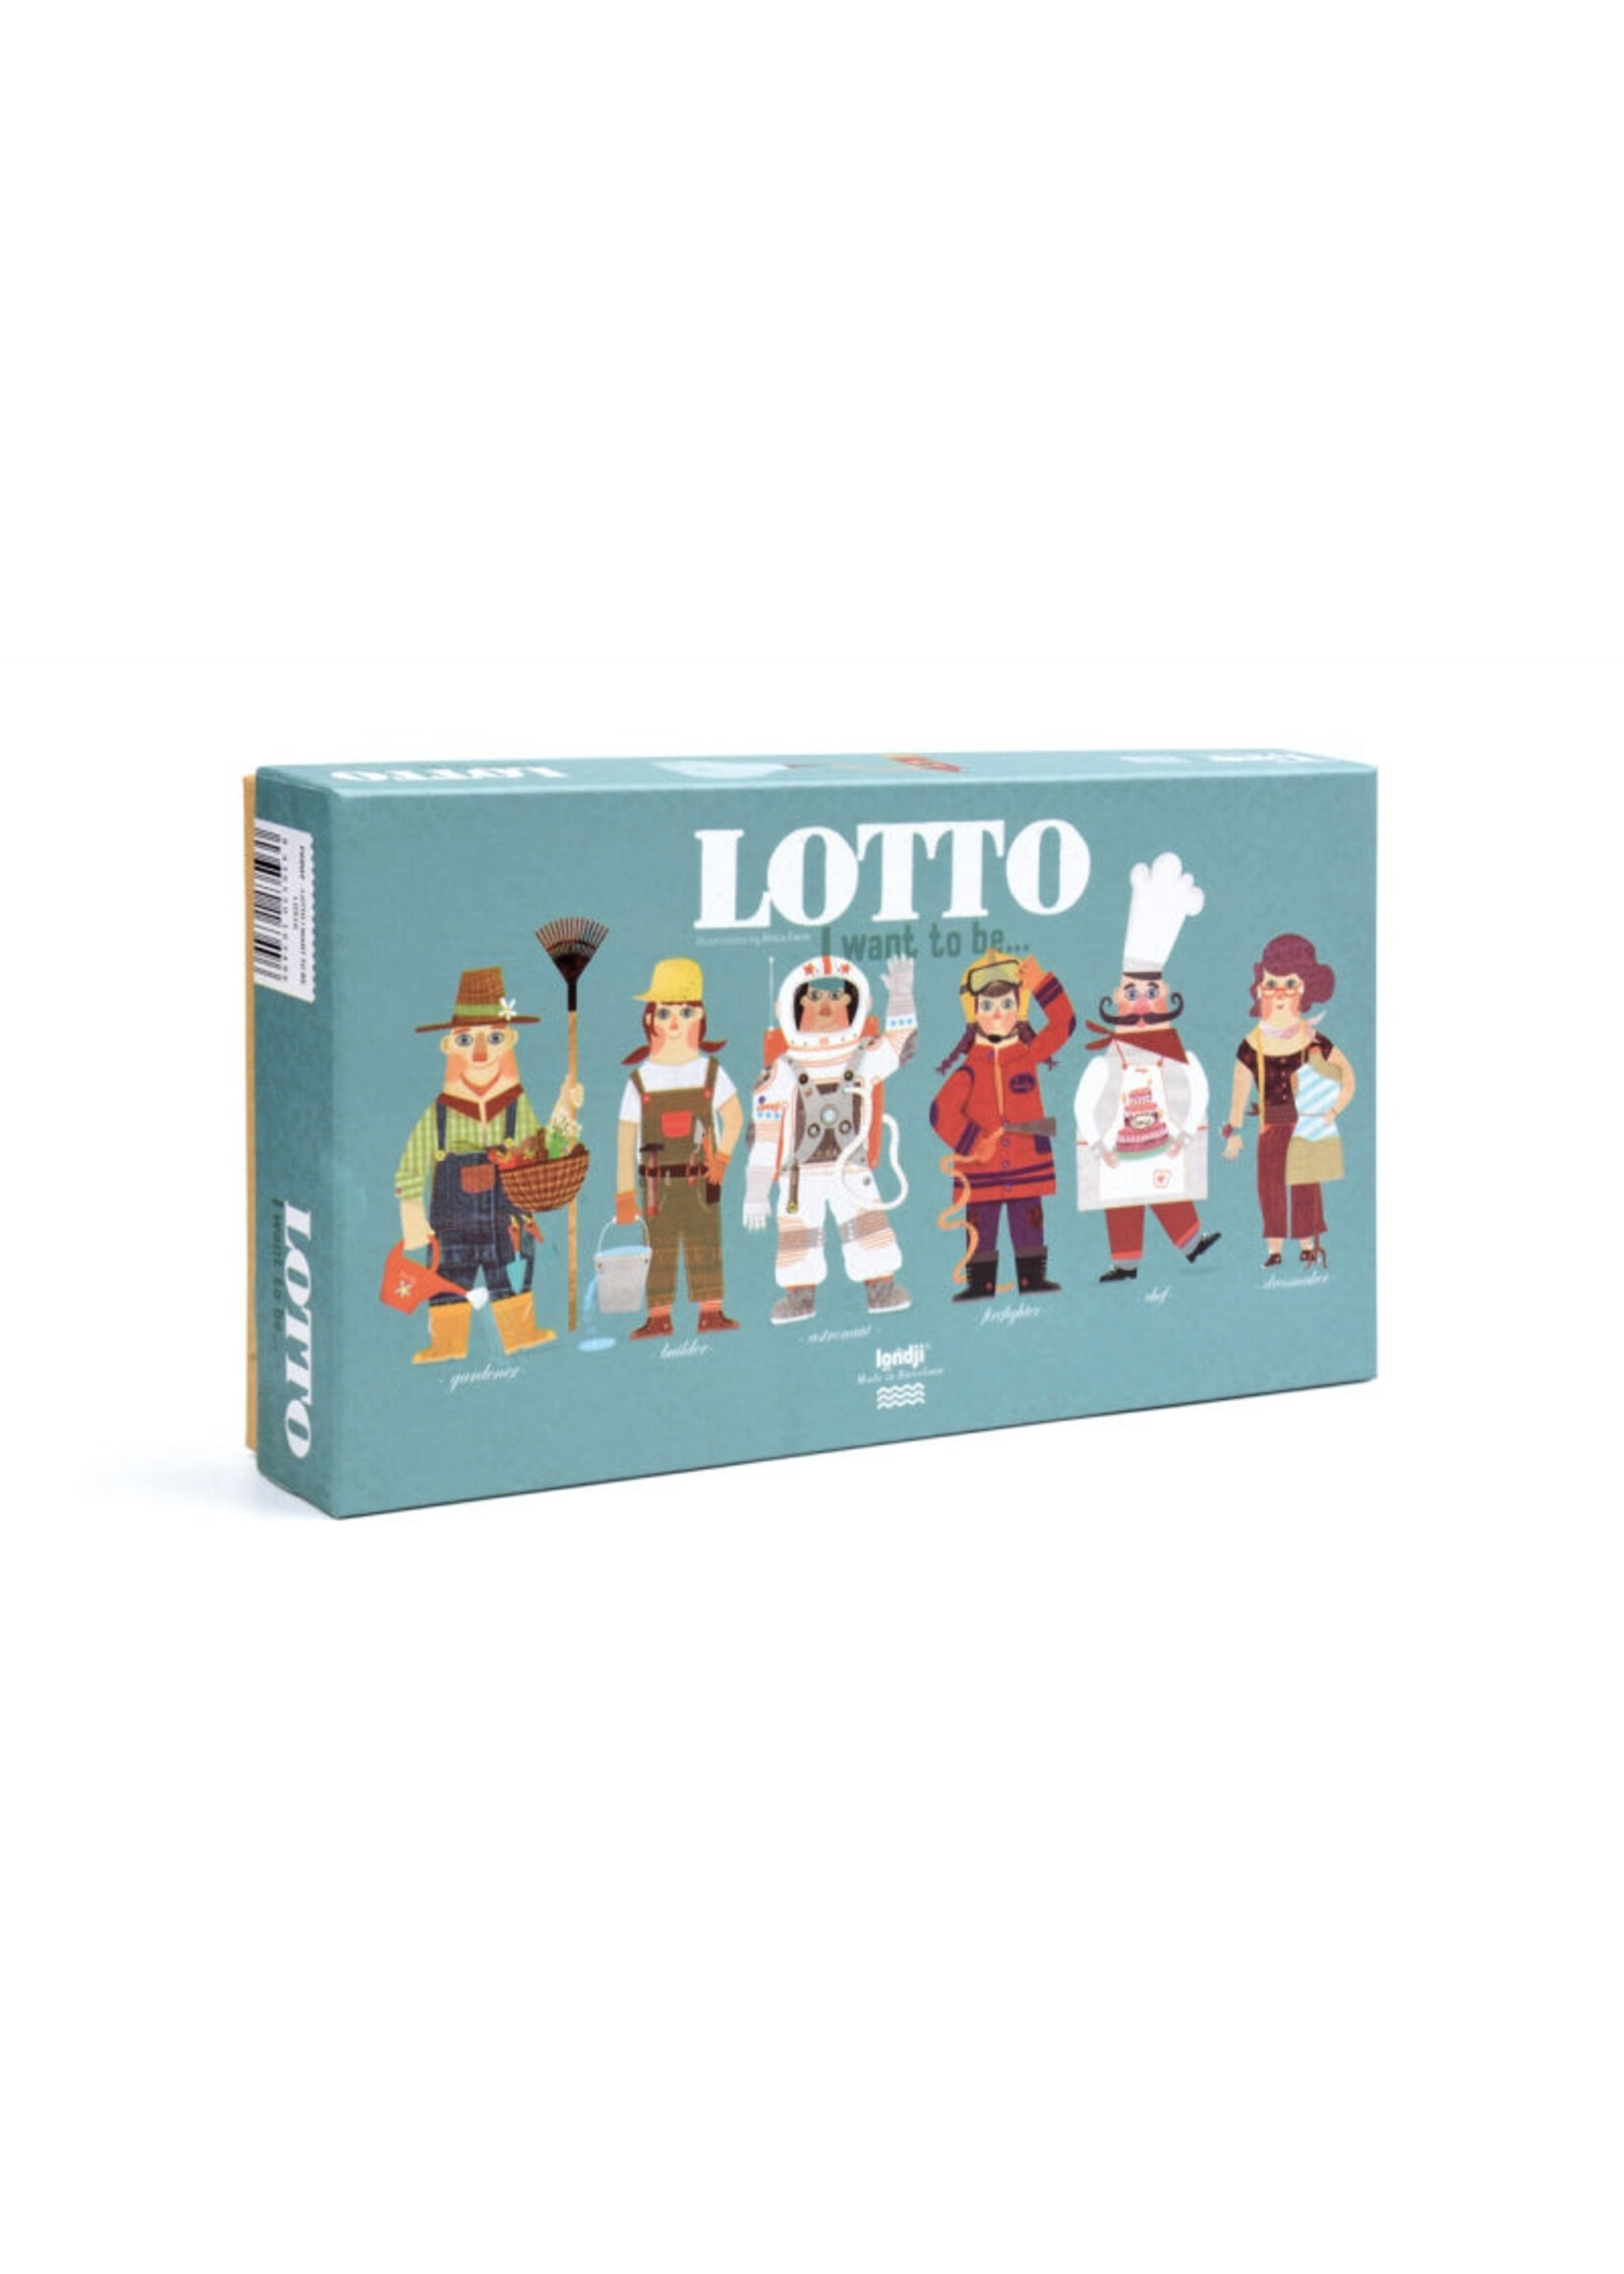 Londji Game I Want To Be Lotto